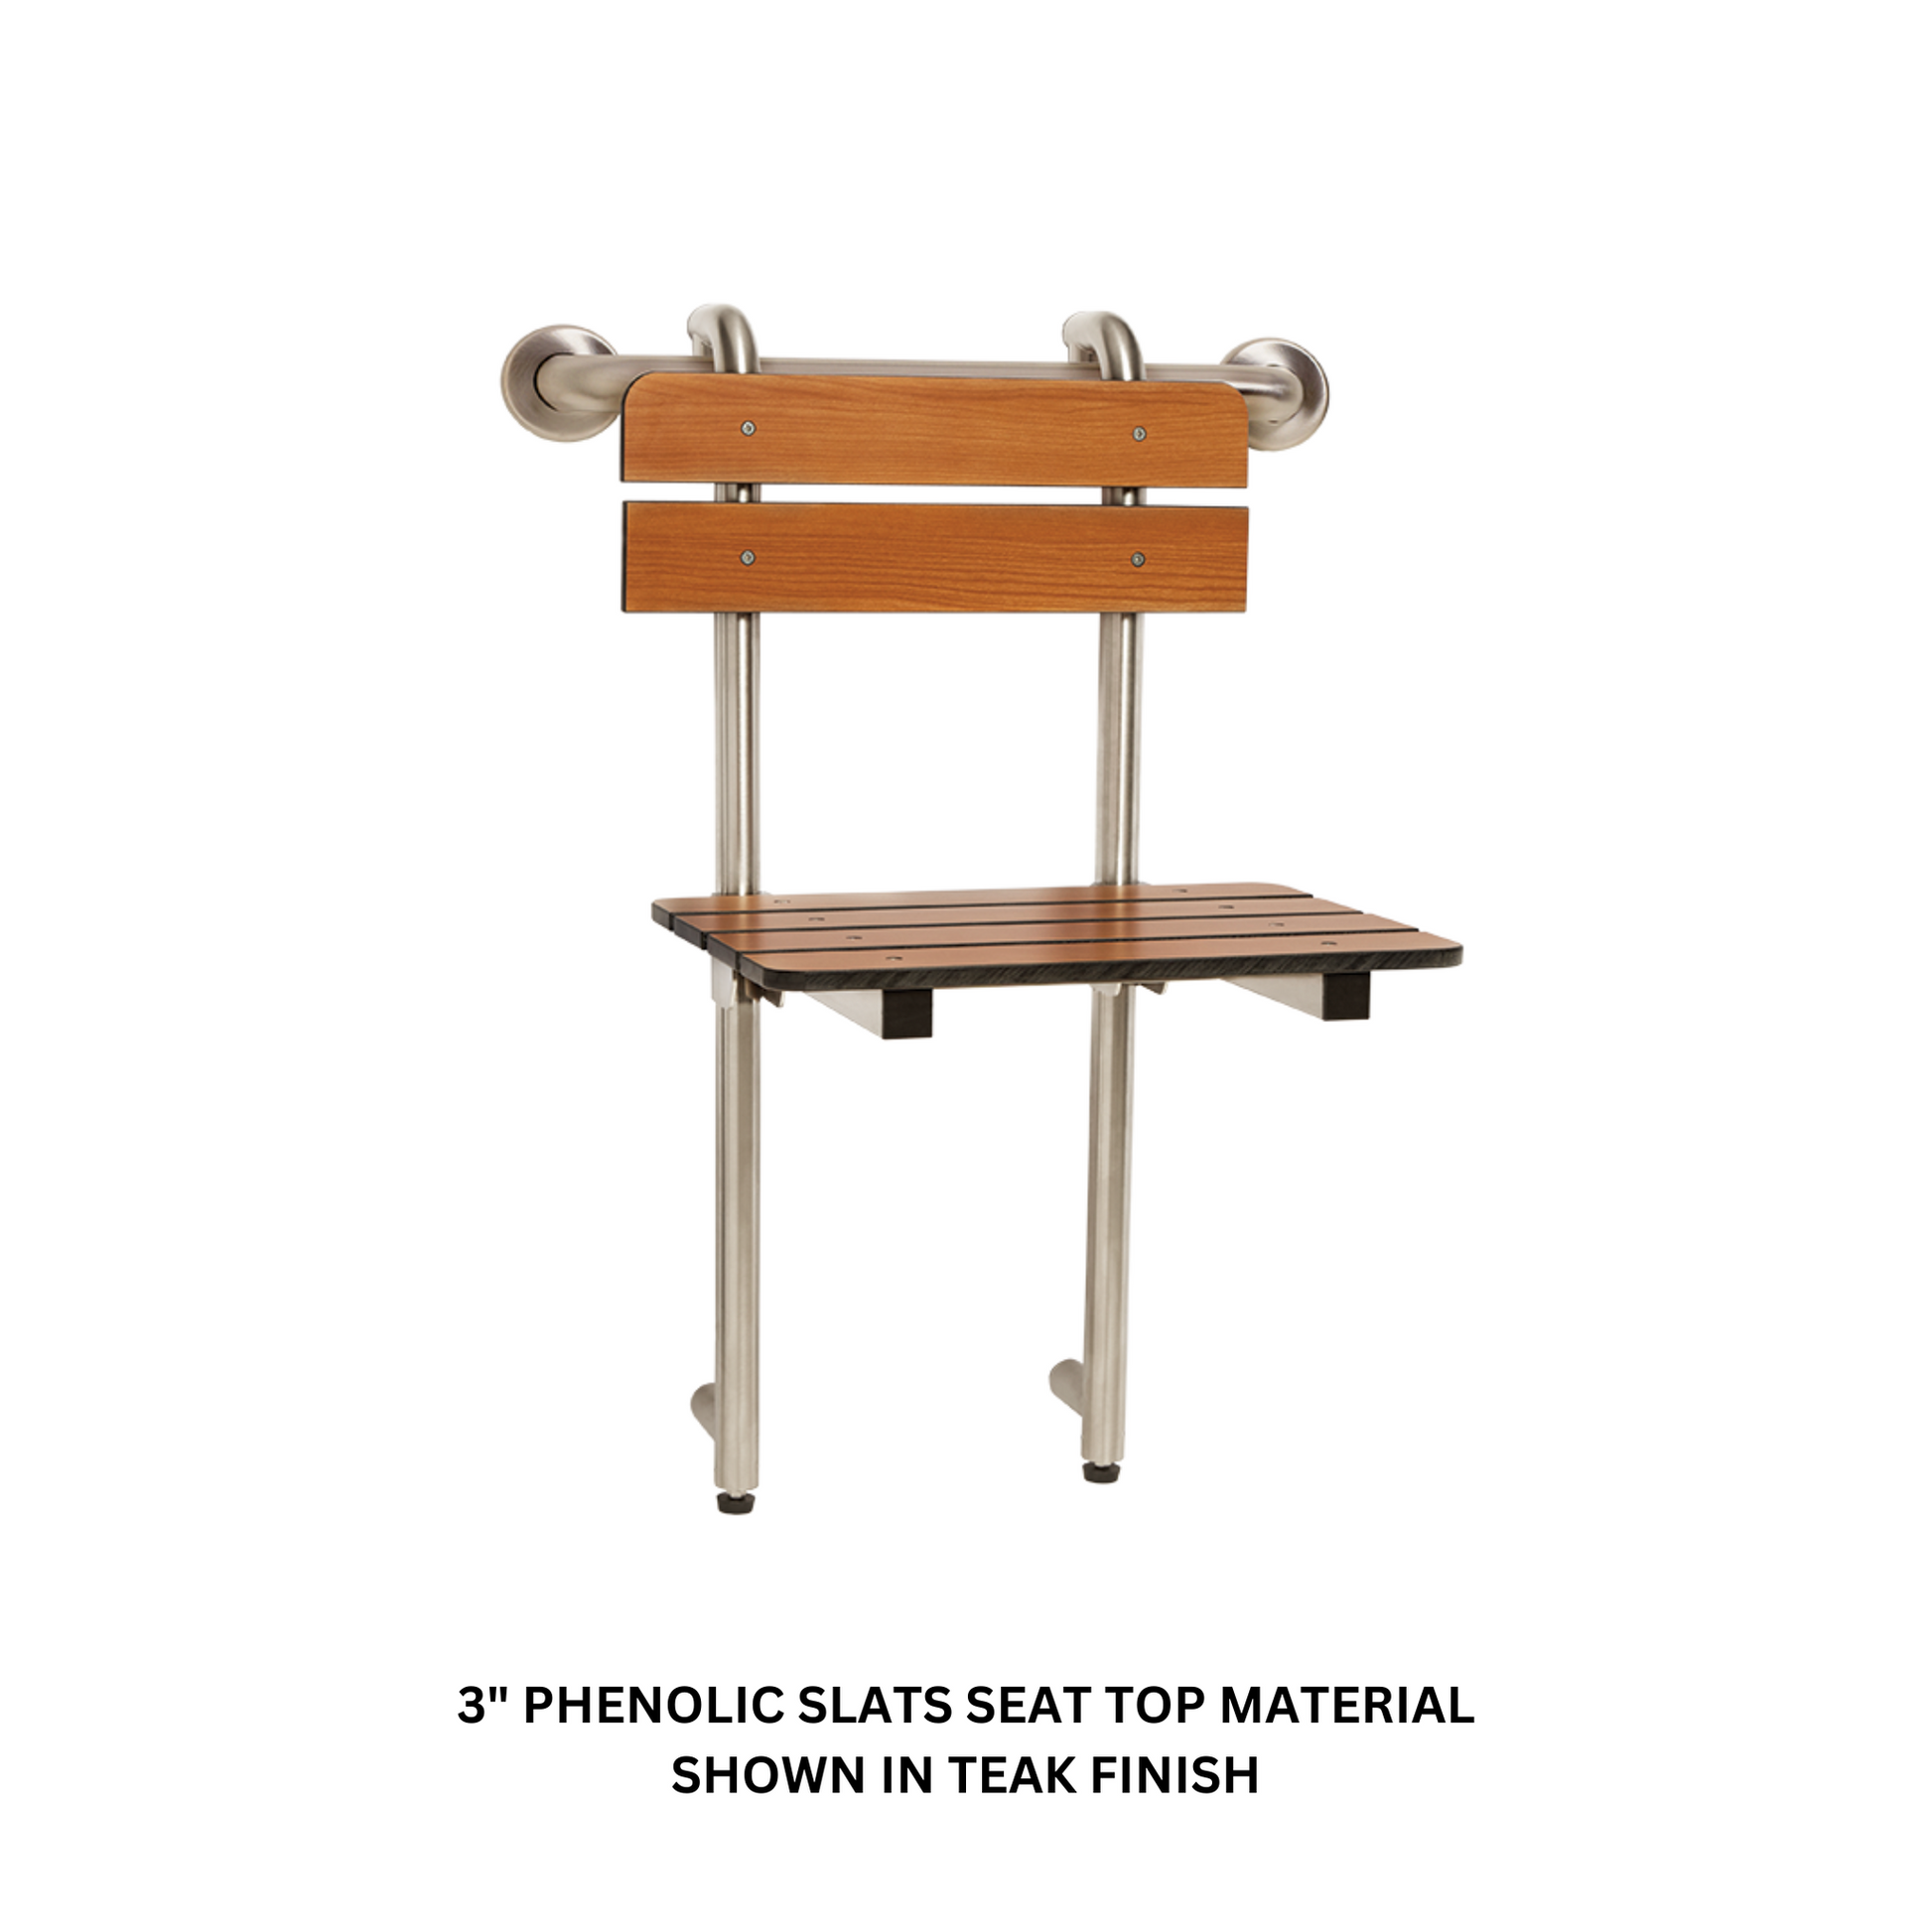 Seachrome Signature Lifestyle & Wellness Series 18" Rustic Teak 3" Phenolic Slats Profile Bench Seat and Grab Bar Hung With Backrest and Legs